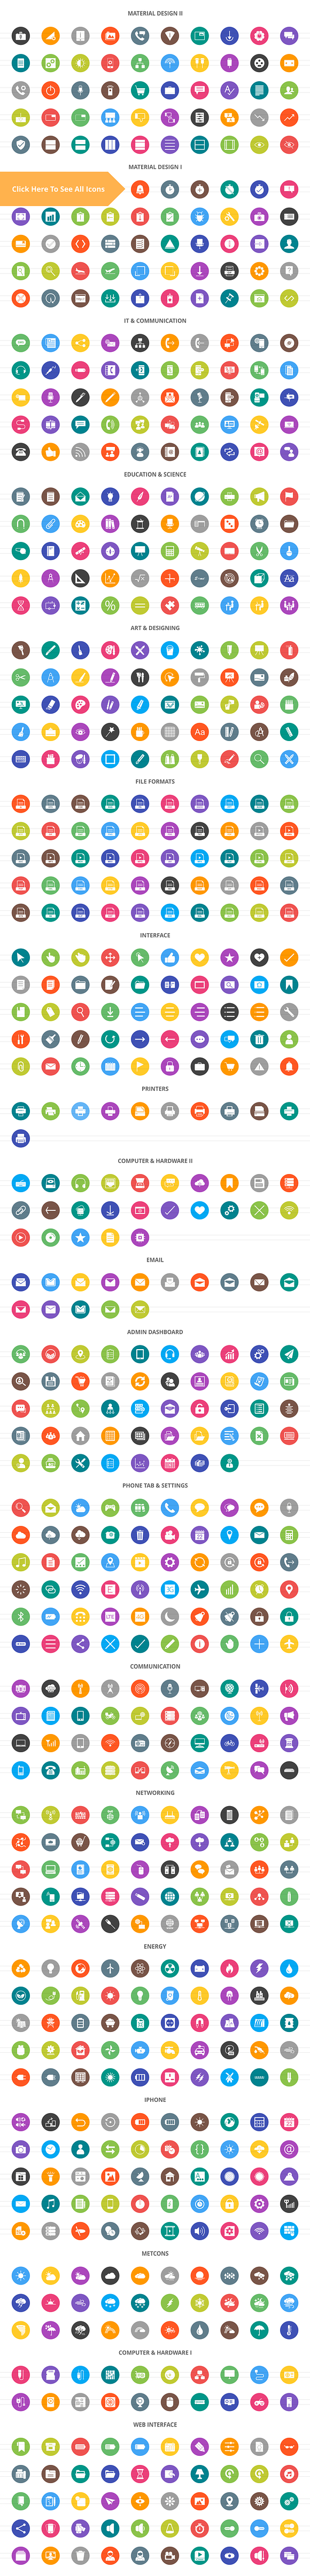 1440 Technology Filled Round Icons in Graphics - product preview 2